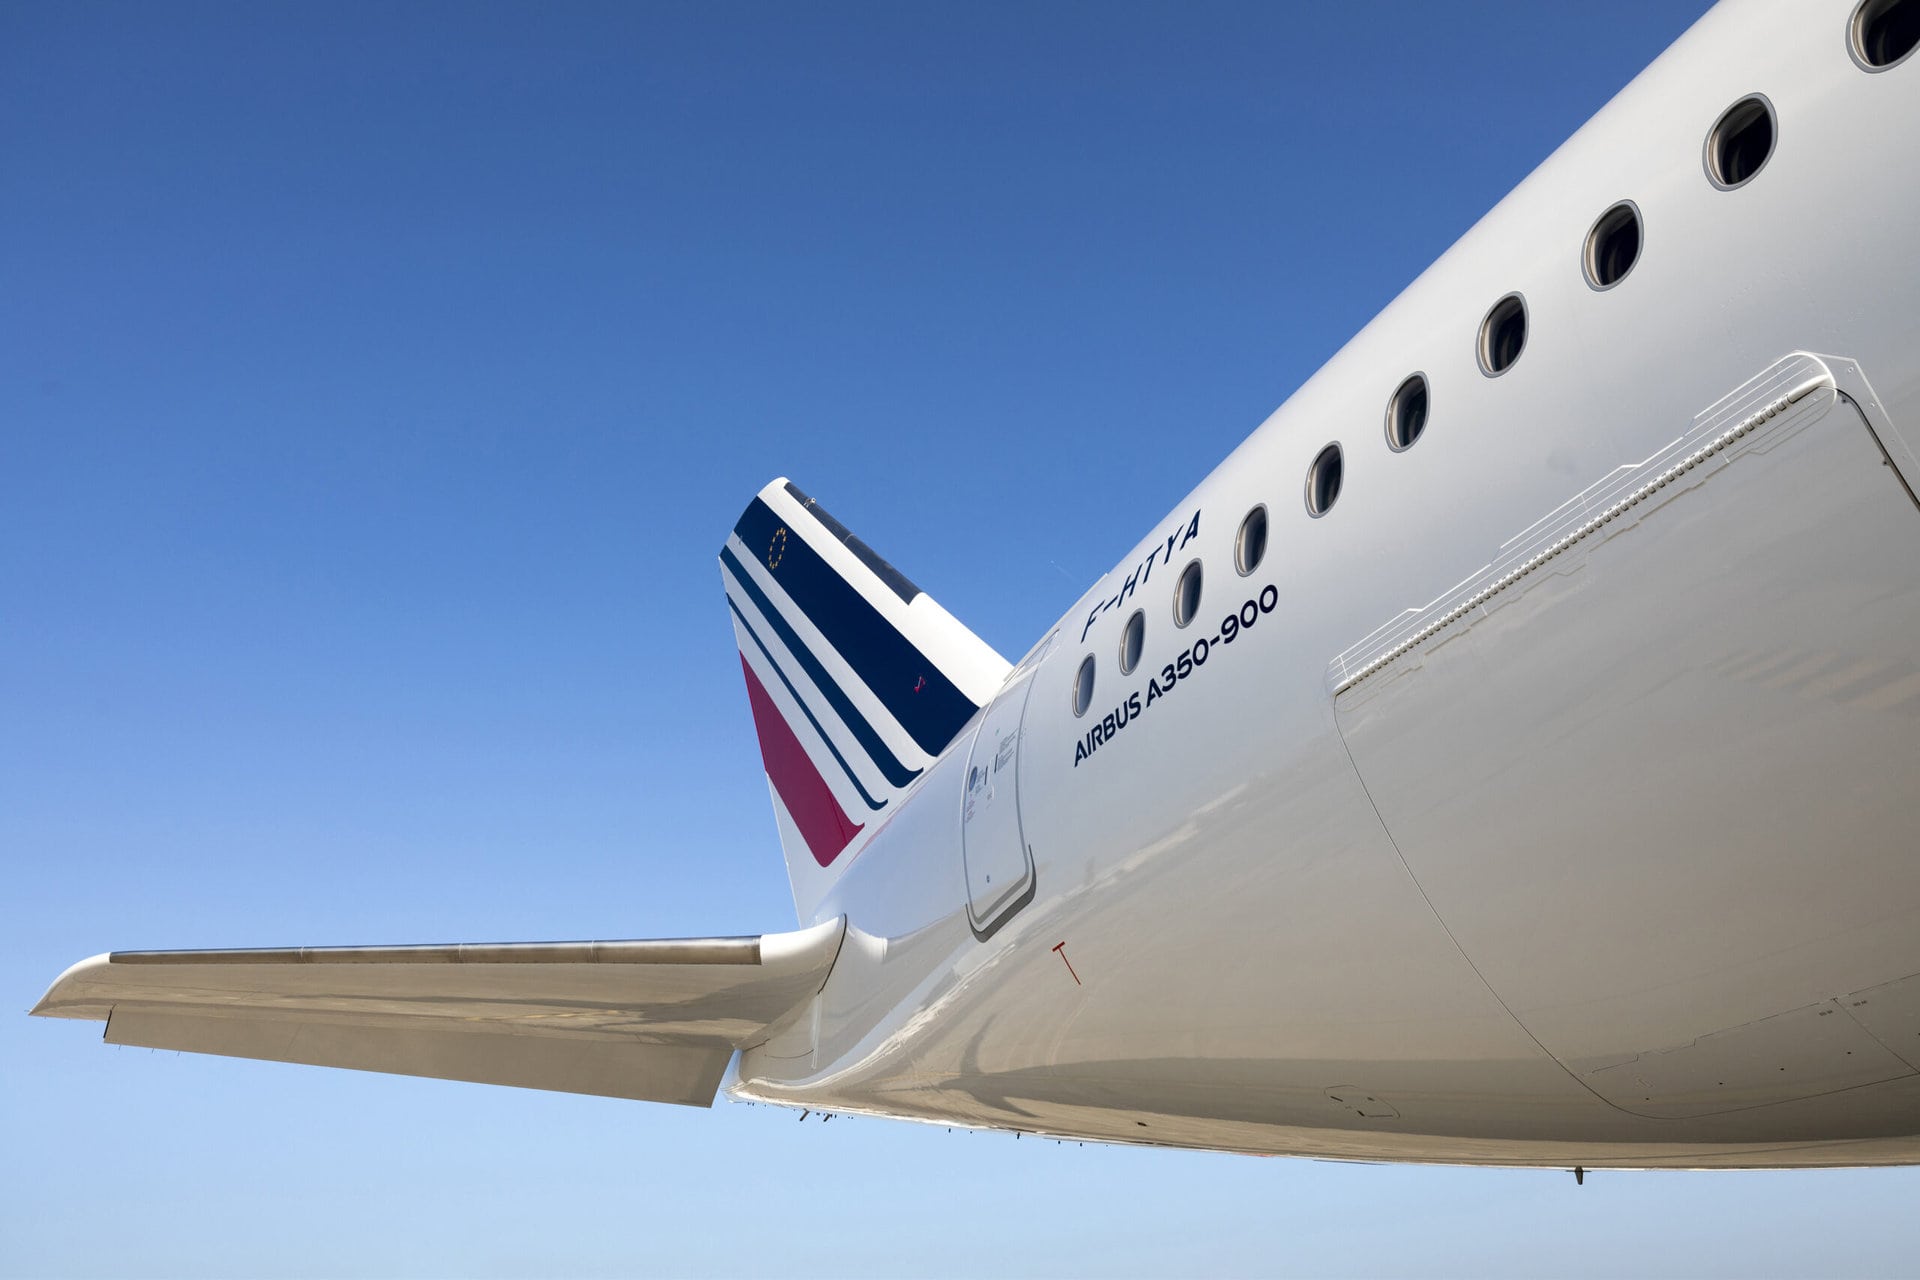 Air France to End Paris Orly Flights in 2026